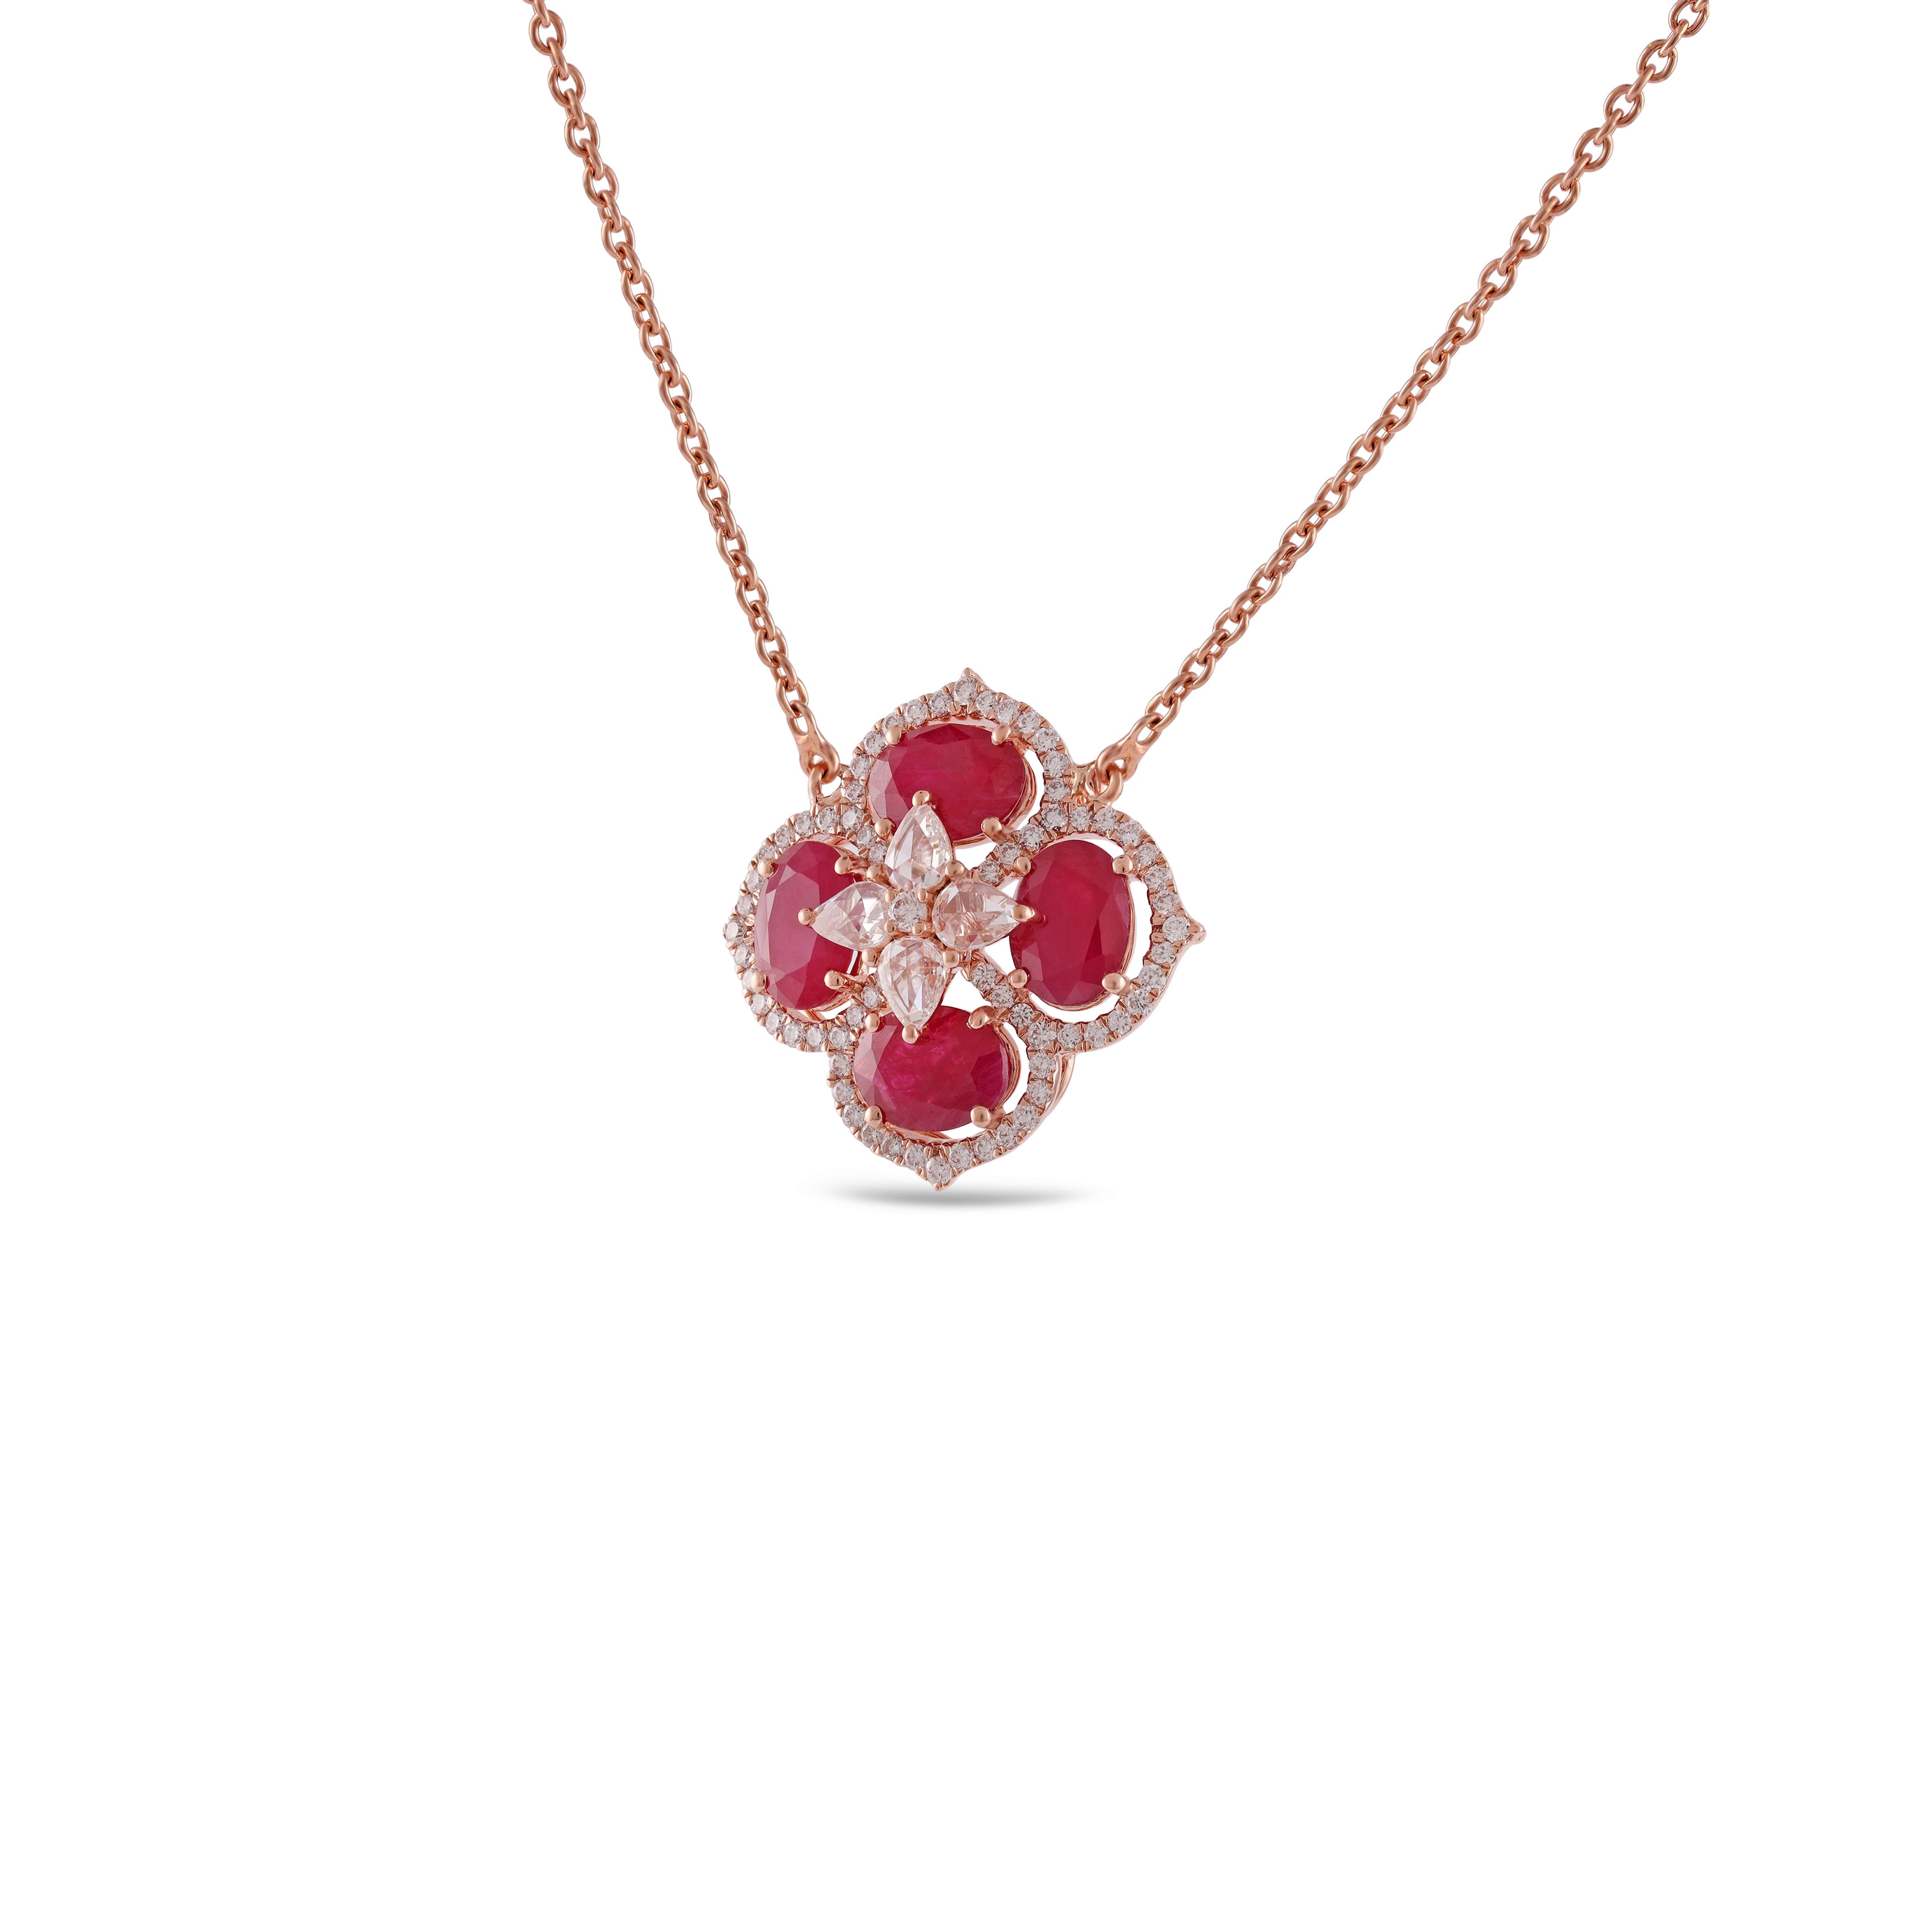 3.78 Carat Oval Cut Ruby Pendant Chain Necklace in 18K Gold with Diamond
18kt Gold 6.22 grams
Brilliant Round Cut Diamond 0.73 Carat

Custom Services
Resizing is available.
Request Customization